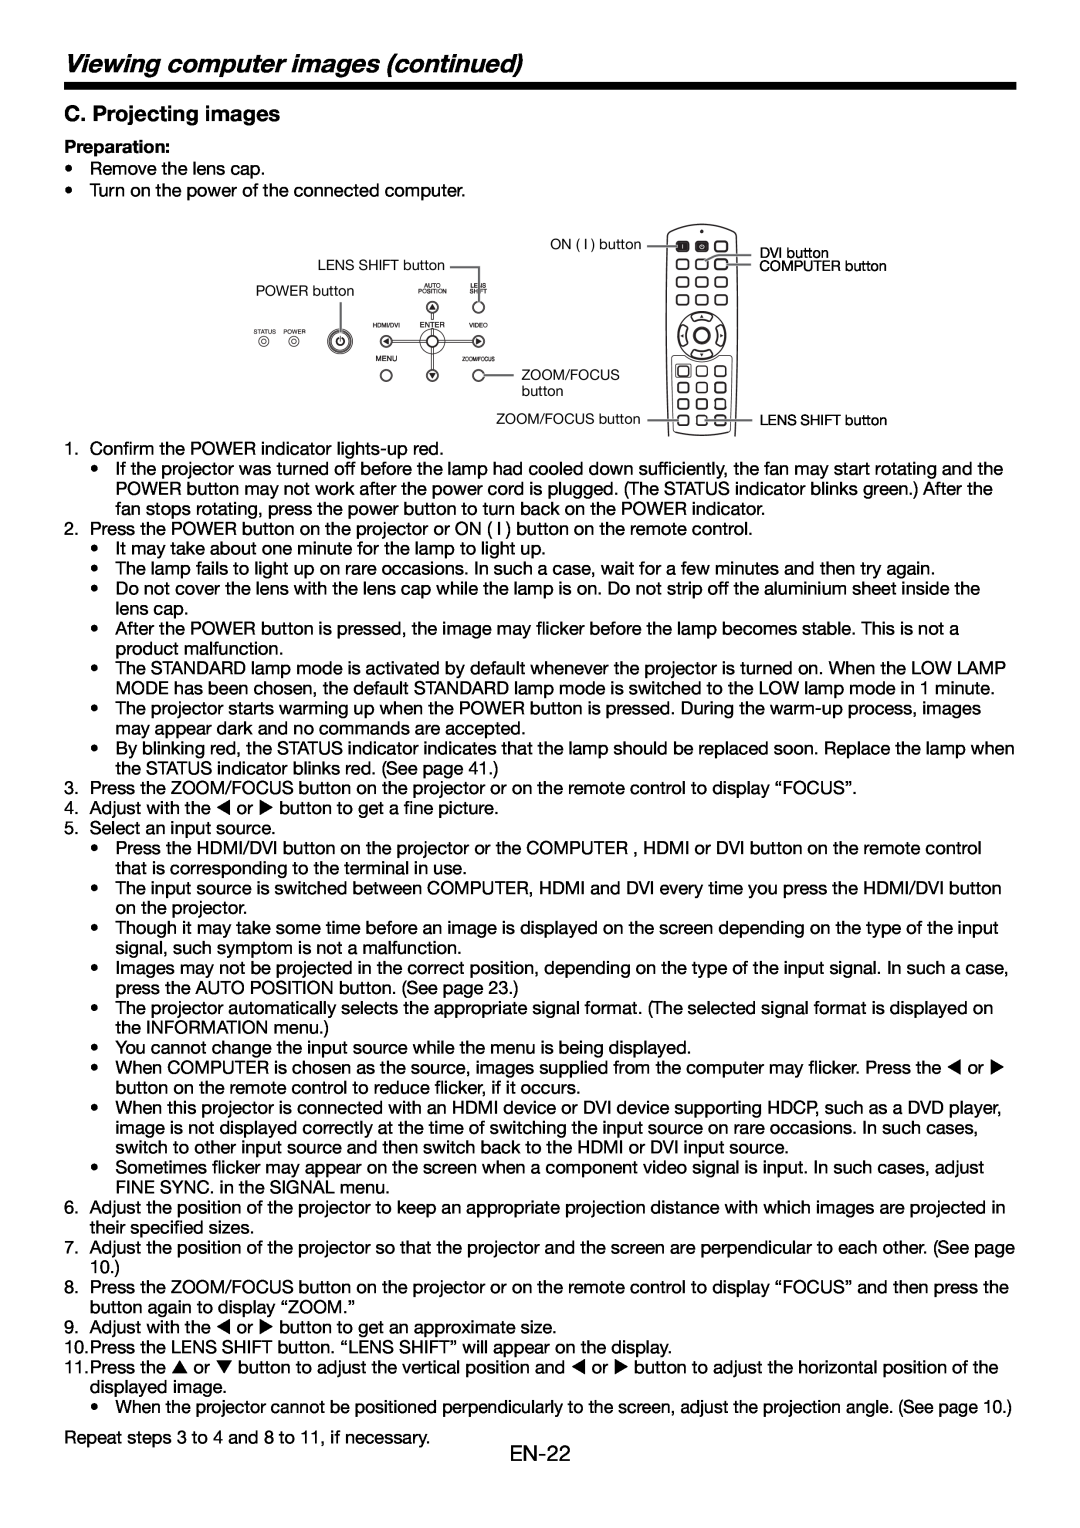 Mitsubishi Electronics HC4900 user manual Viewing computer images continued, C. Projecting images, Preparation 